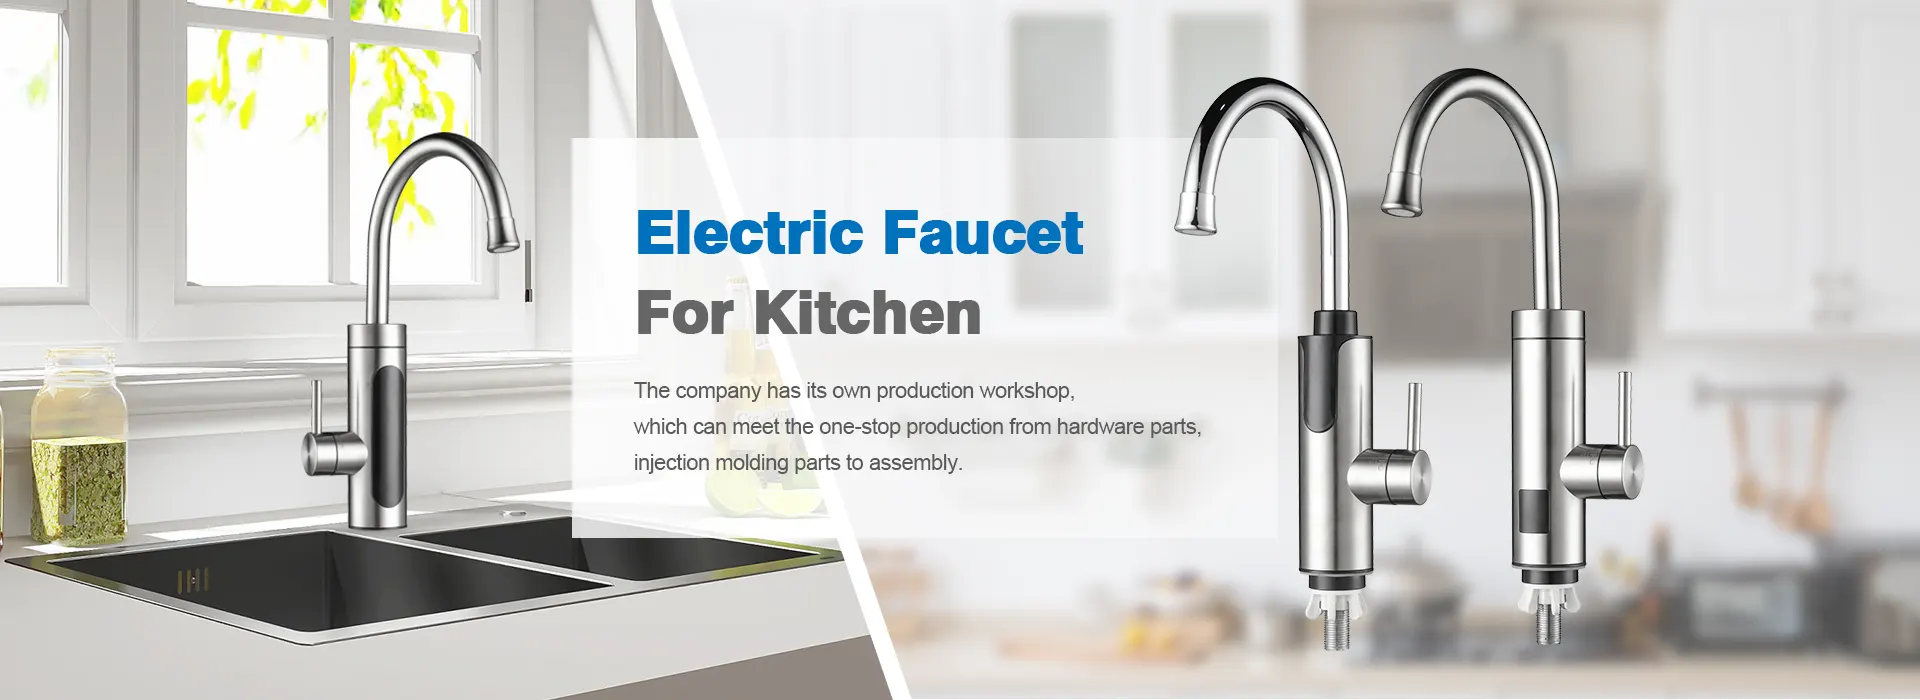 China Stainless Steel Electric Faucet For Kitchen Manufacturers